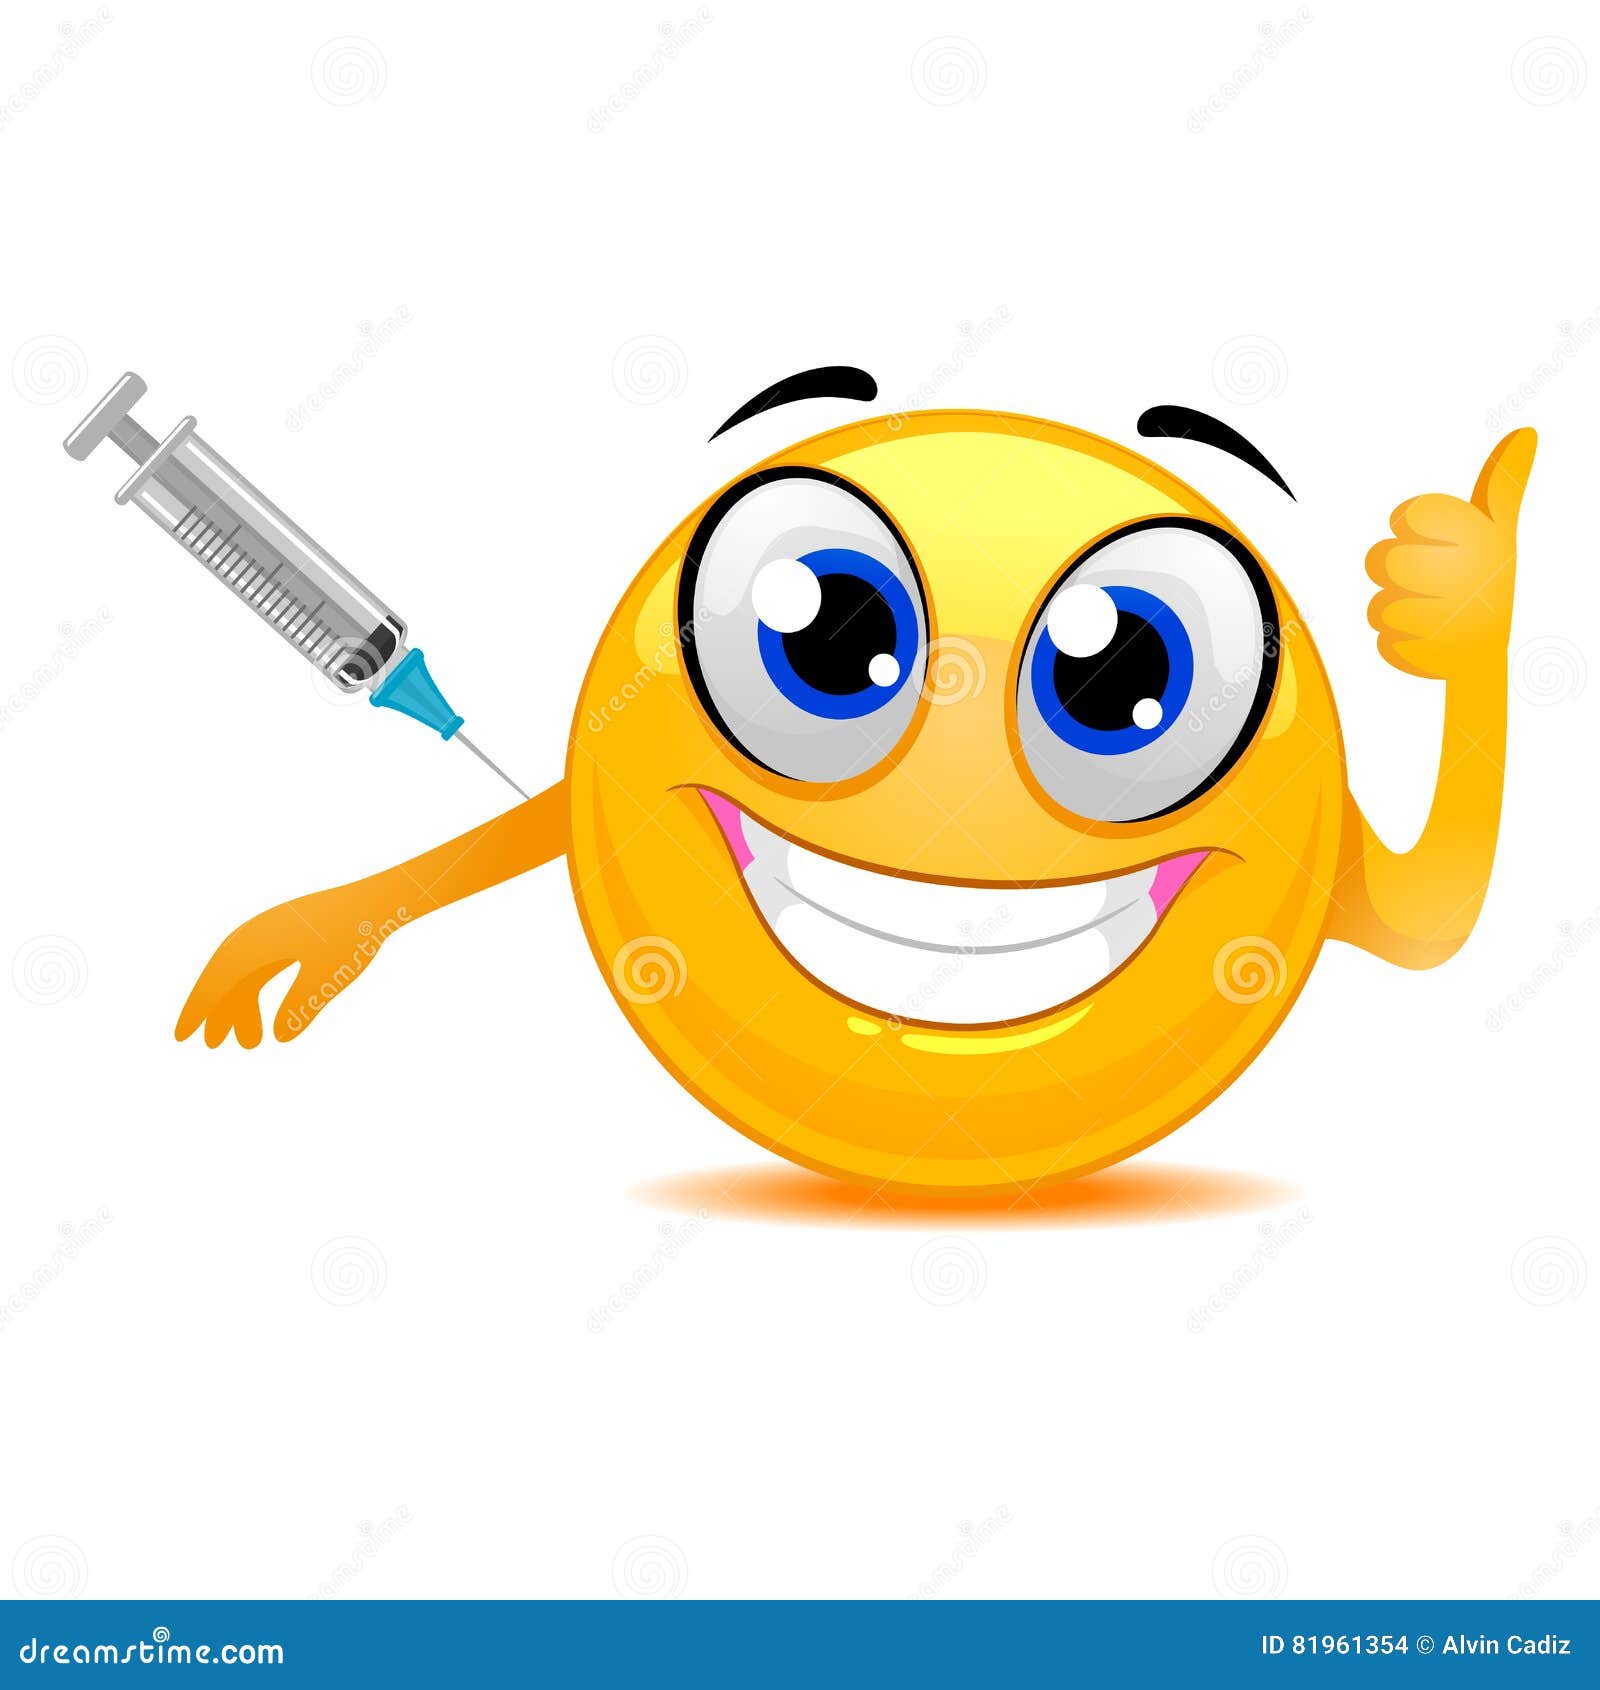 Smiley Emoticon Happily Taking a Vaccine